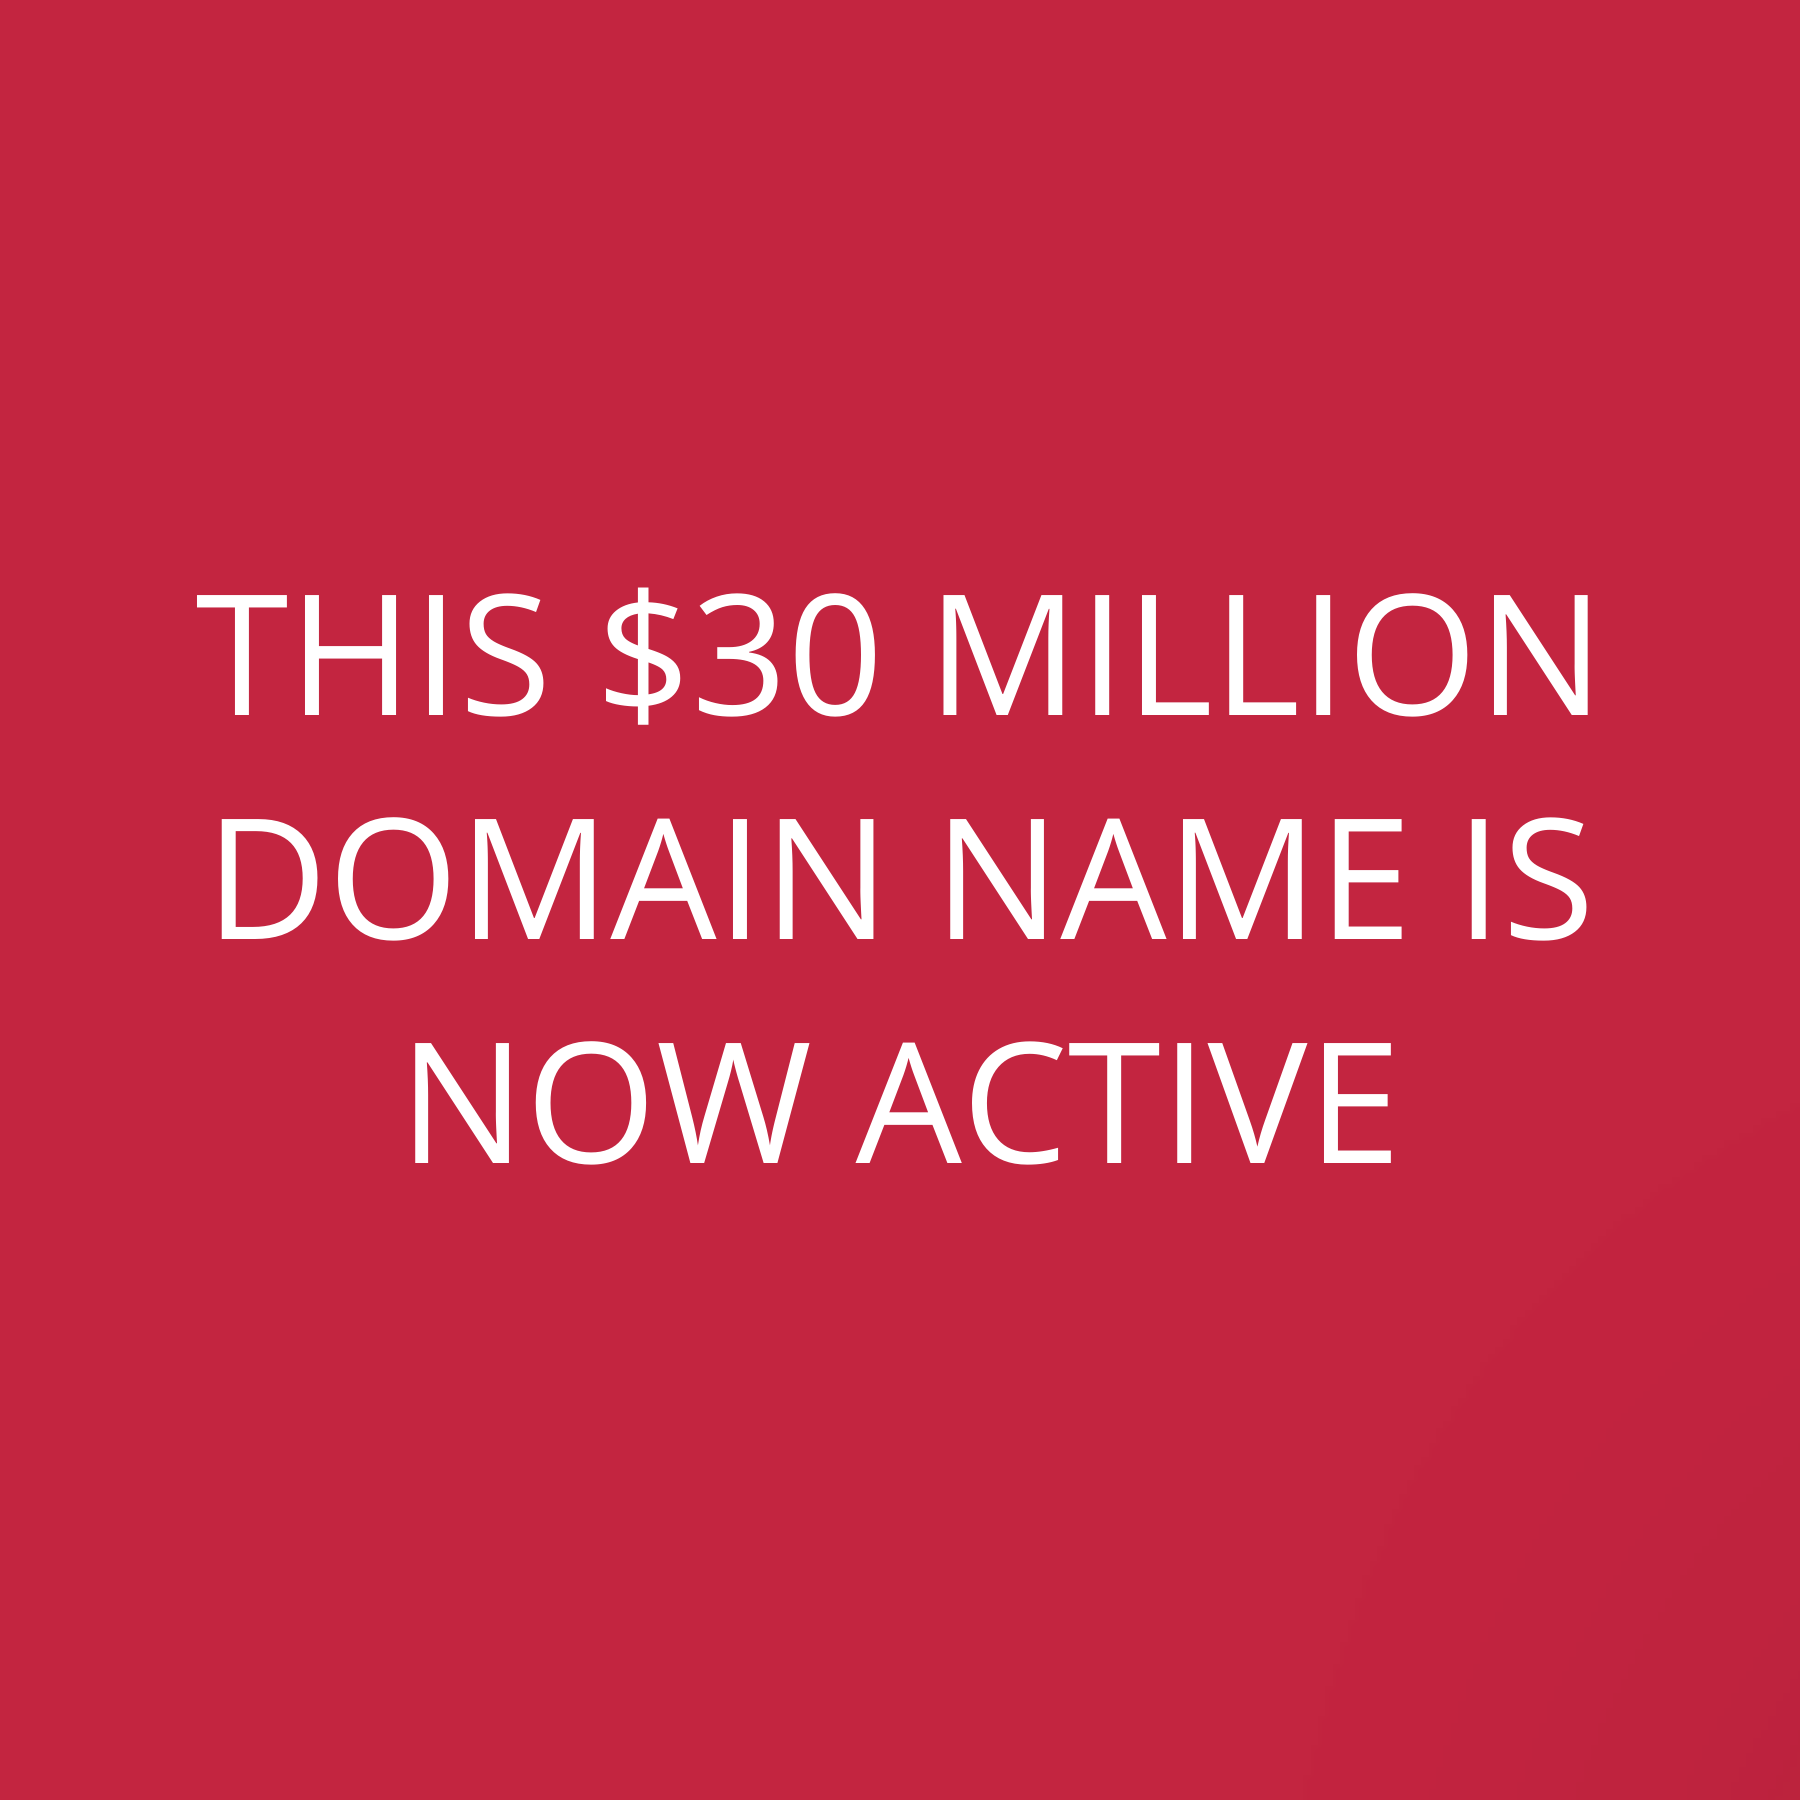 This $30 Million domain name is now active